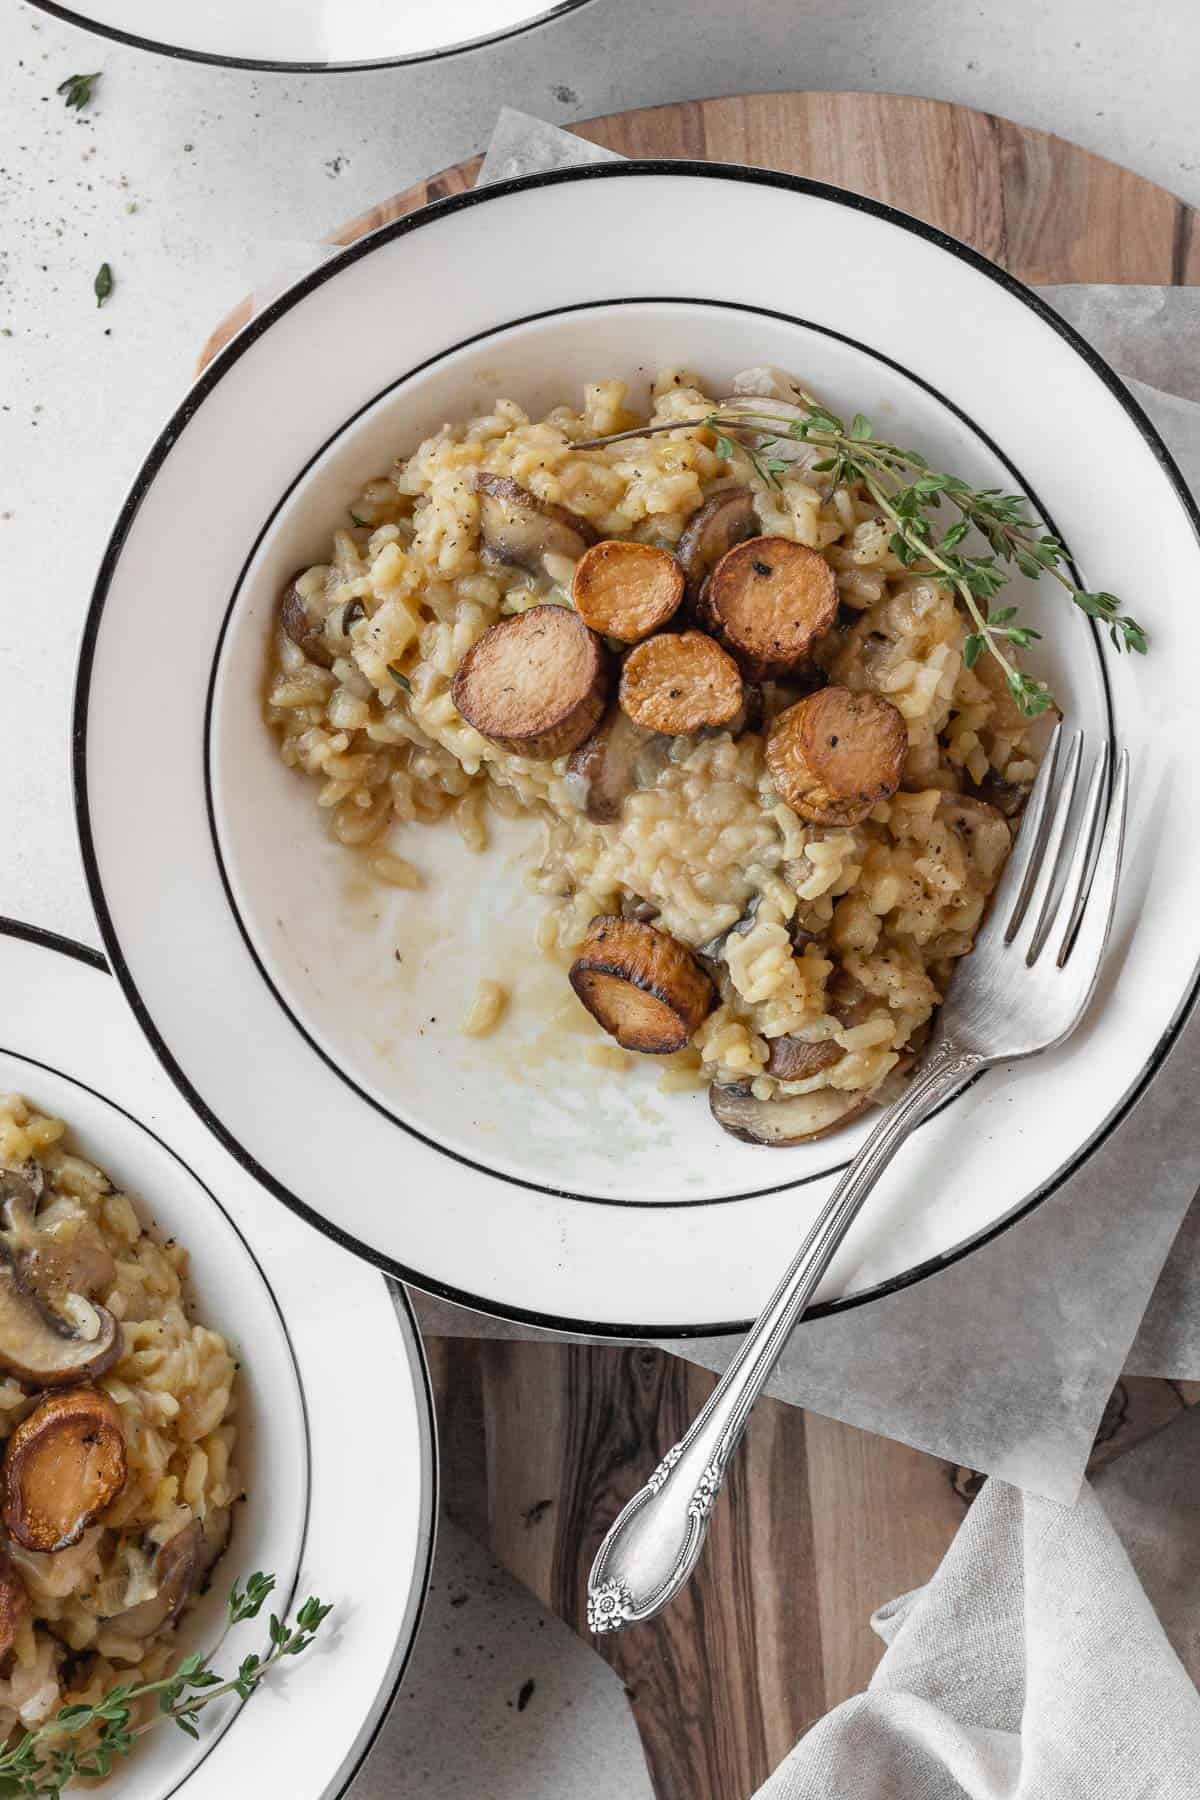 A half eaten plate of vegetarian risotto with vegan scallops on top.